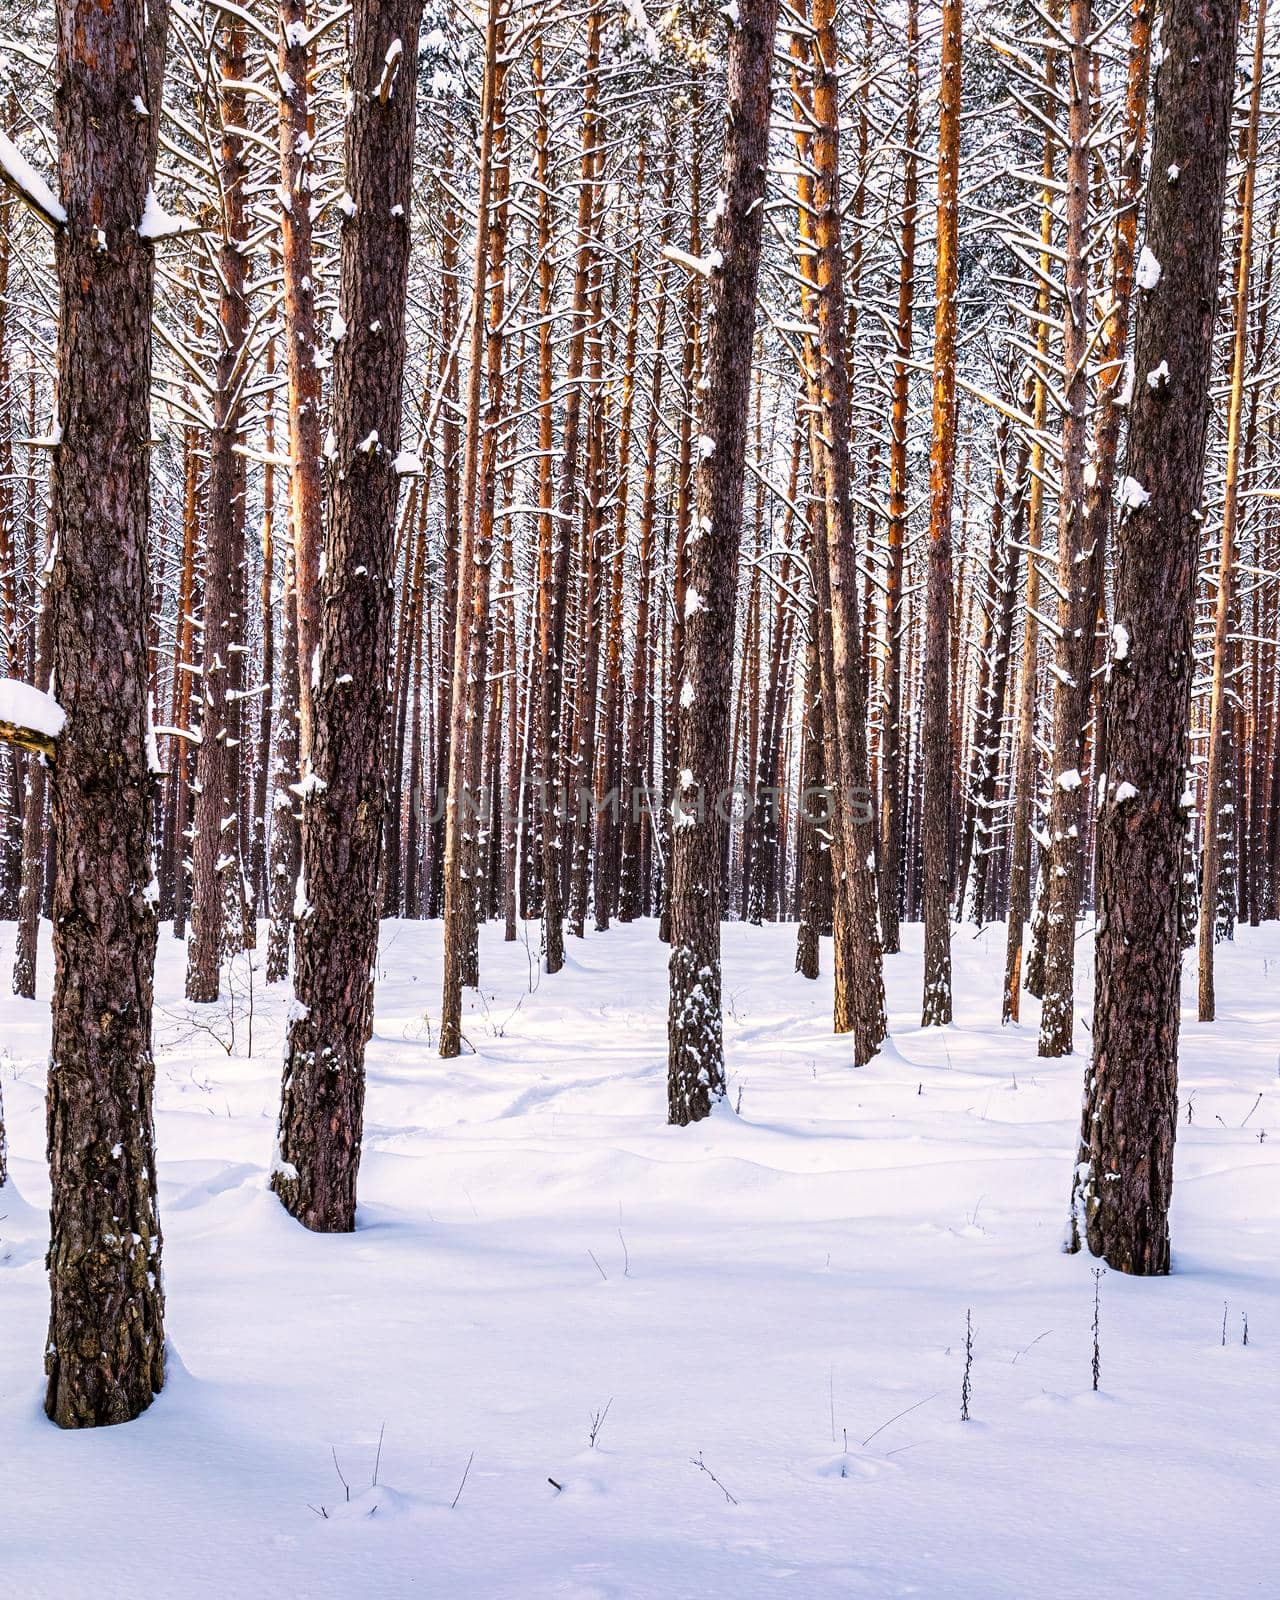 Winter pine forest on a sunny day, covered with snow. Rows of pine trunks.